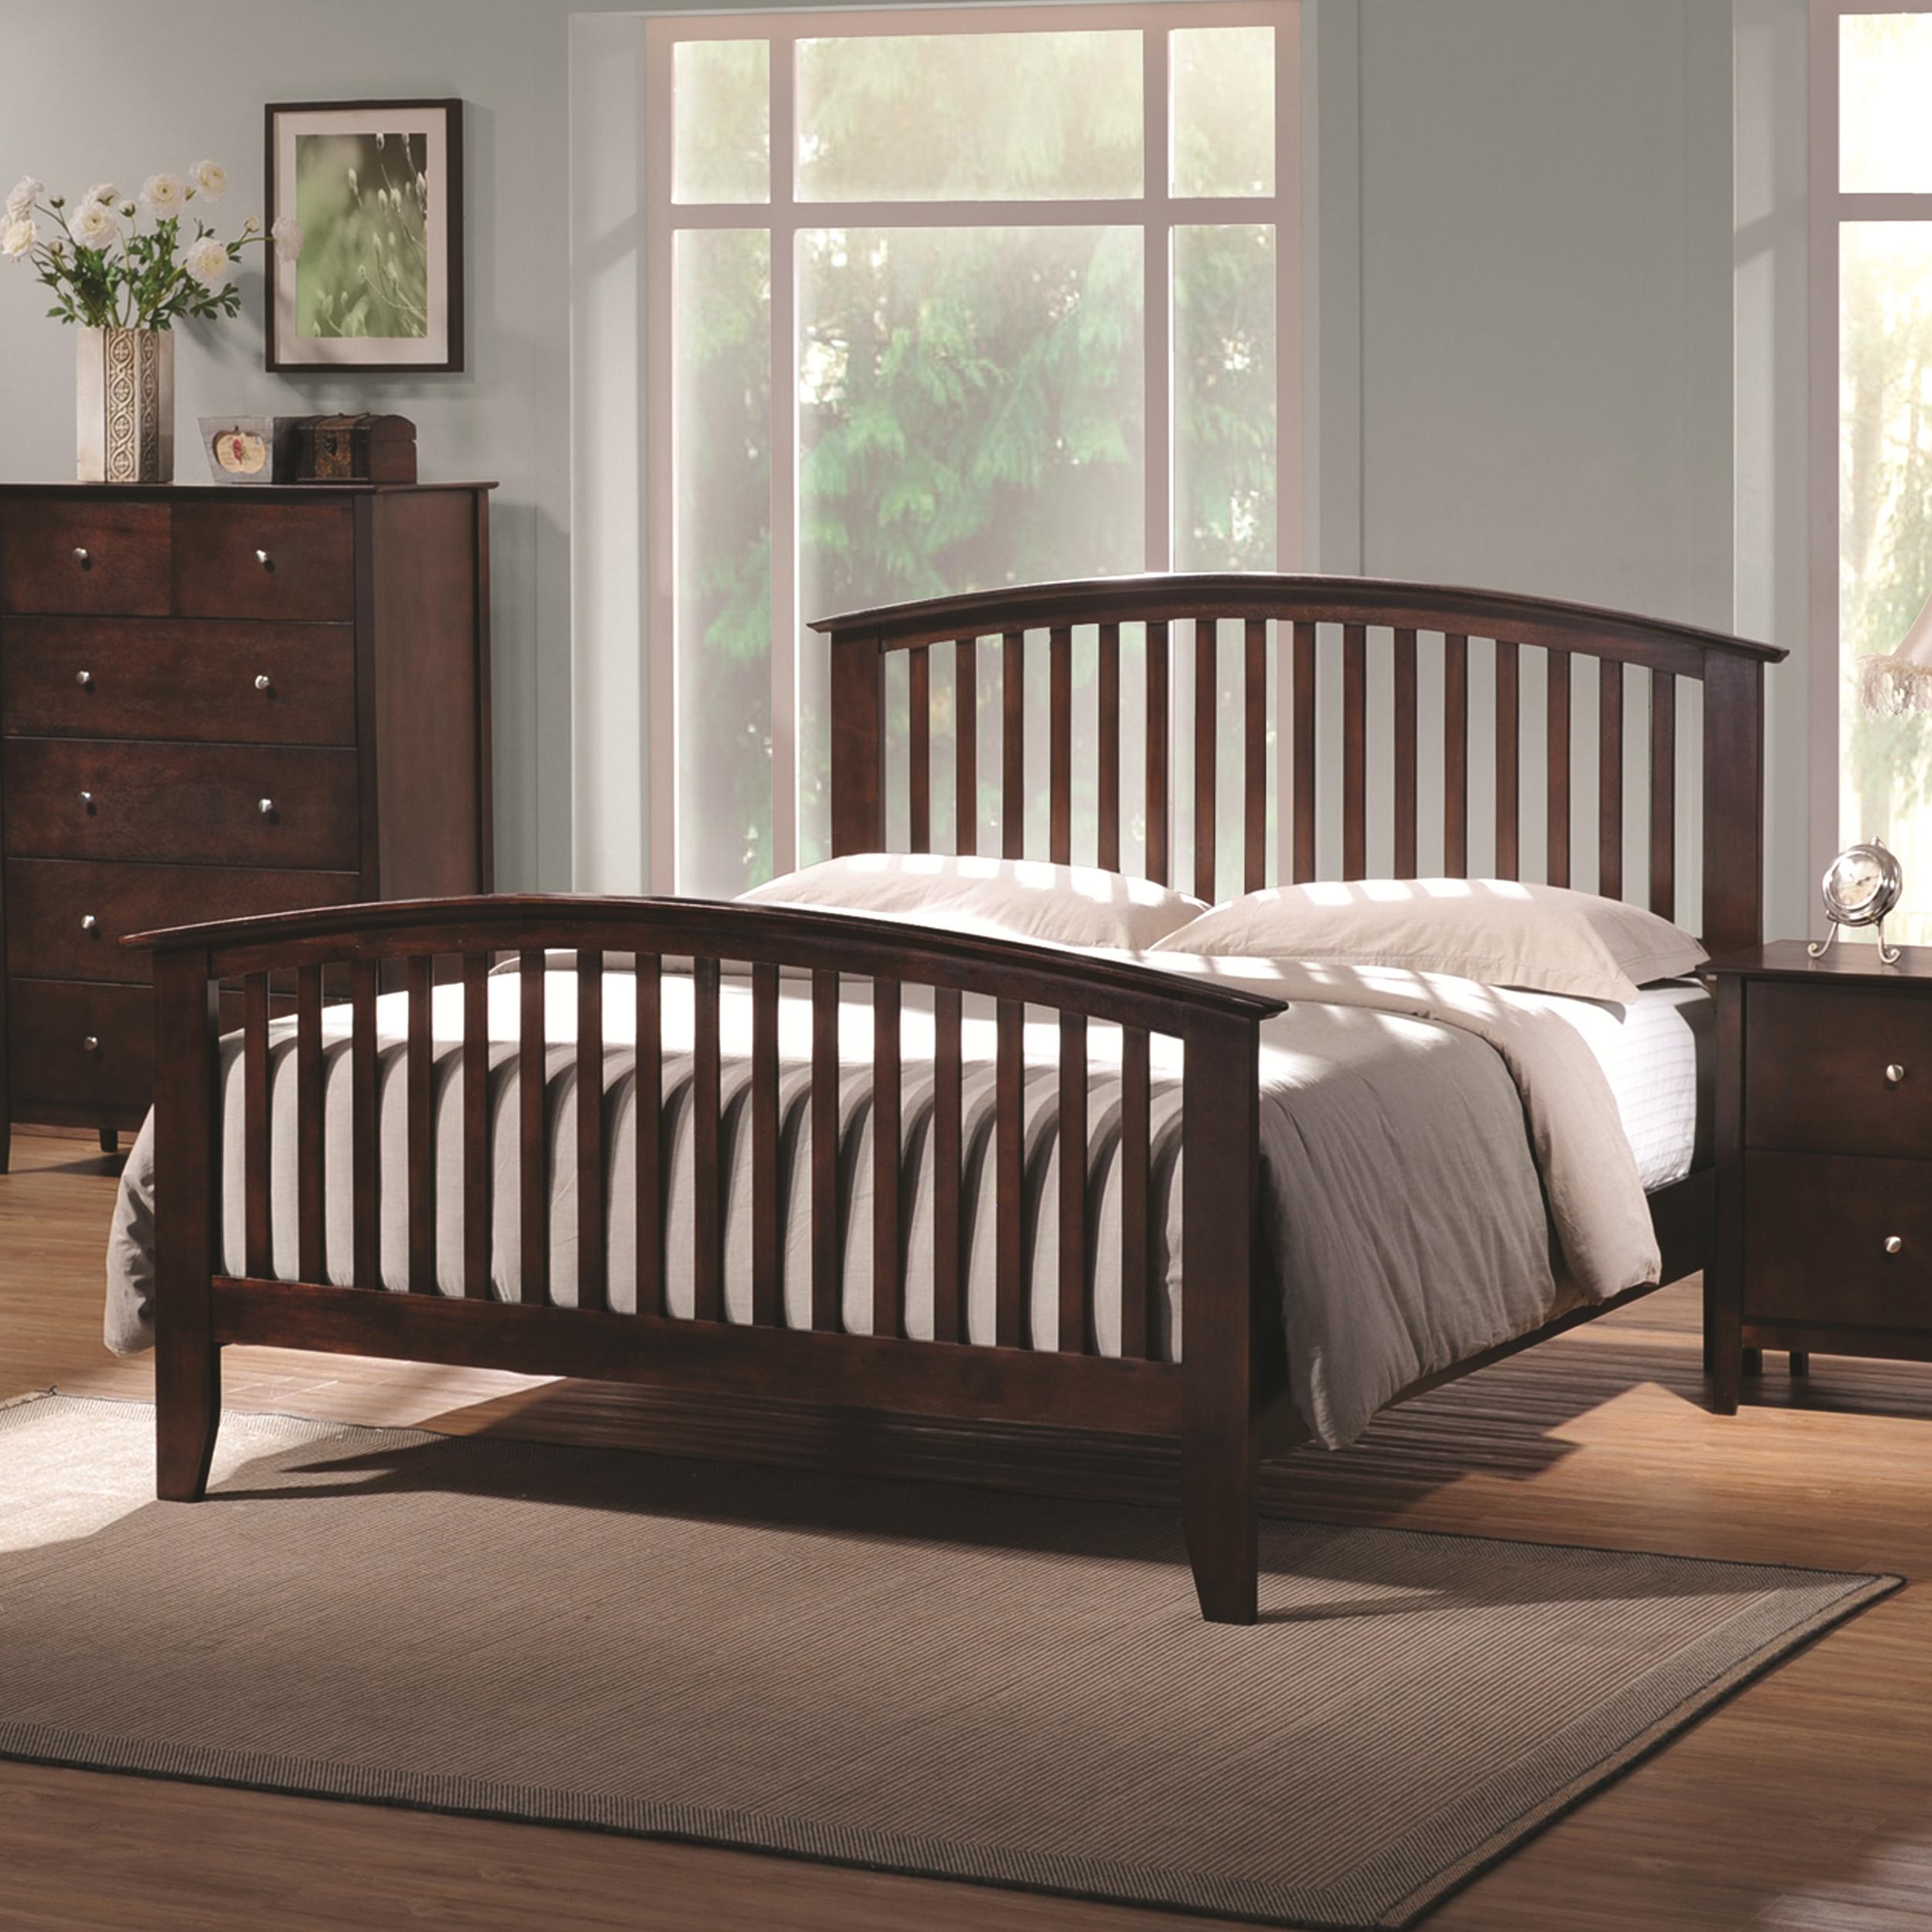 Coaster 202081q Tia Cappuccino Slatted Bed Available In Queen